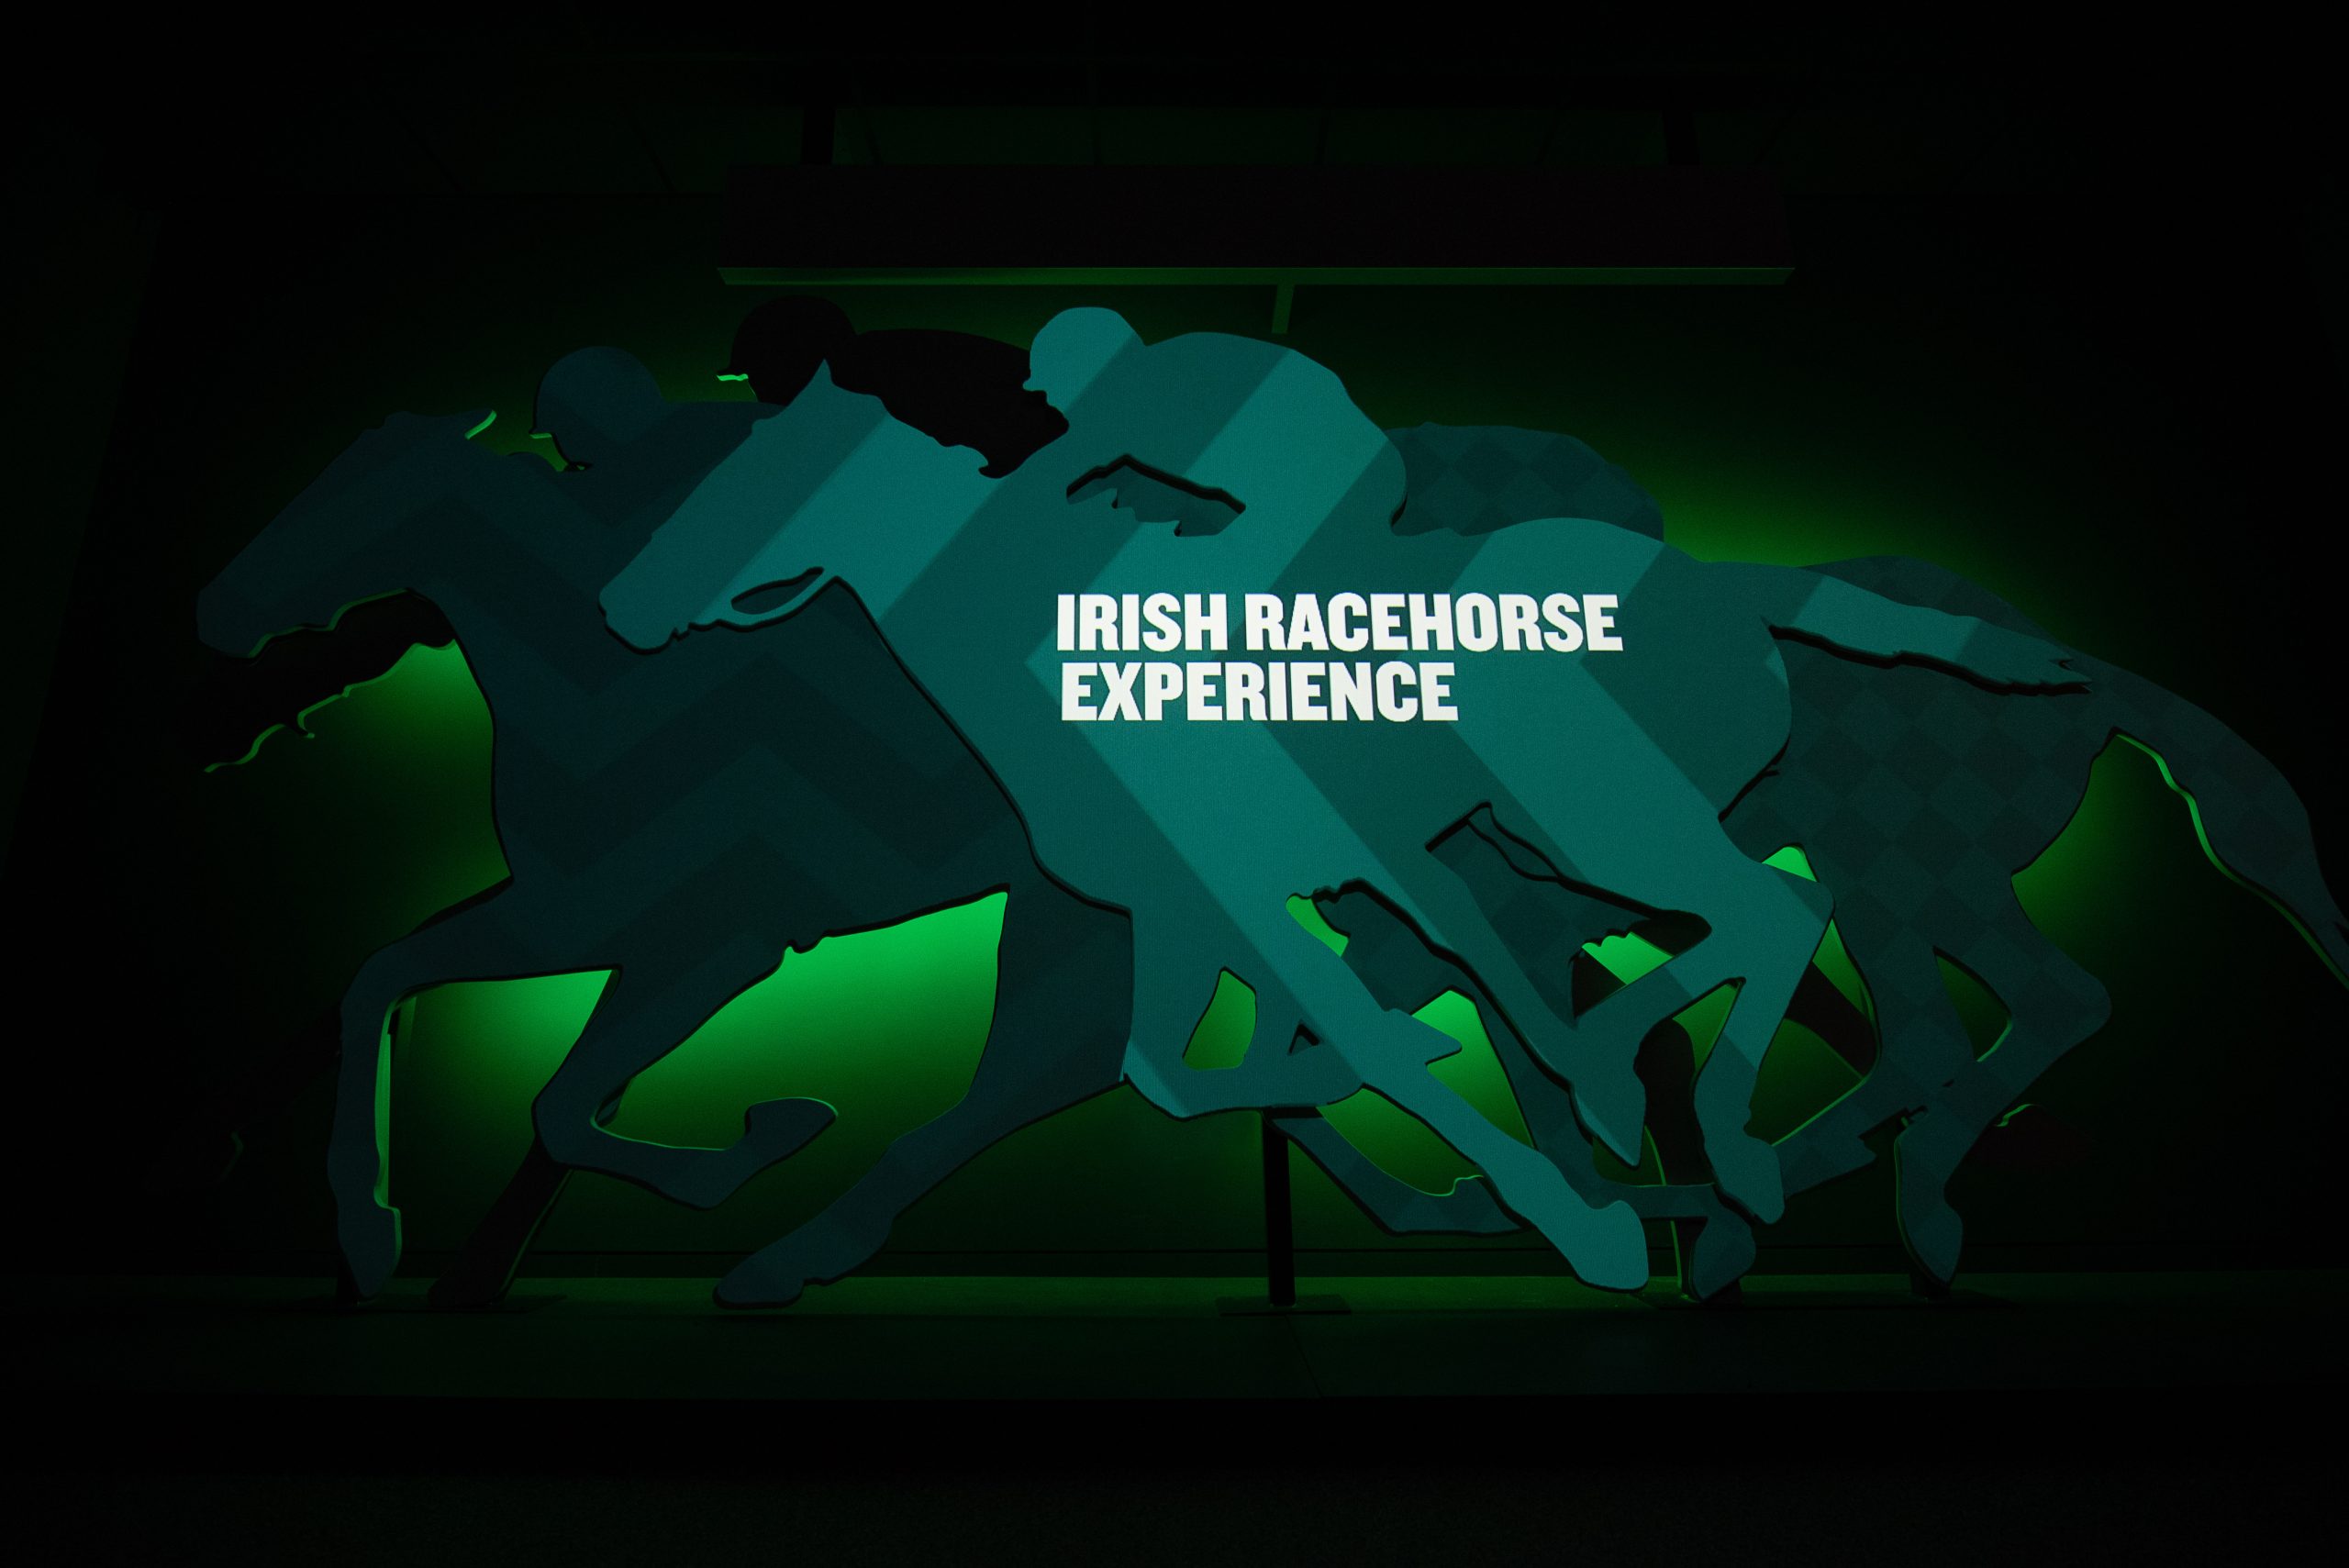 The Irish Racehorse Experience wins big at the Museum & Heritage Awards in London-thumbnail